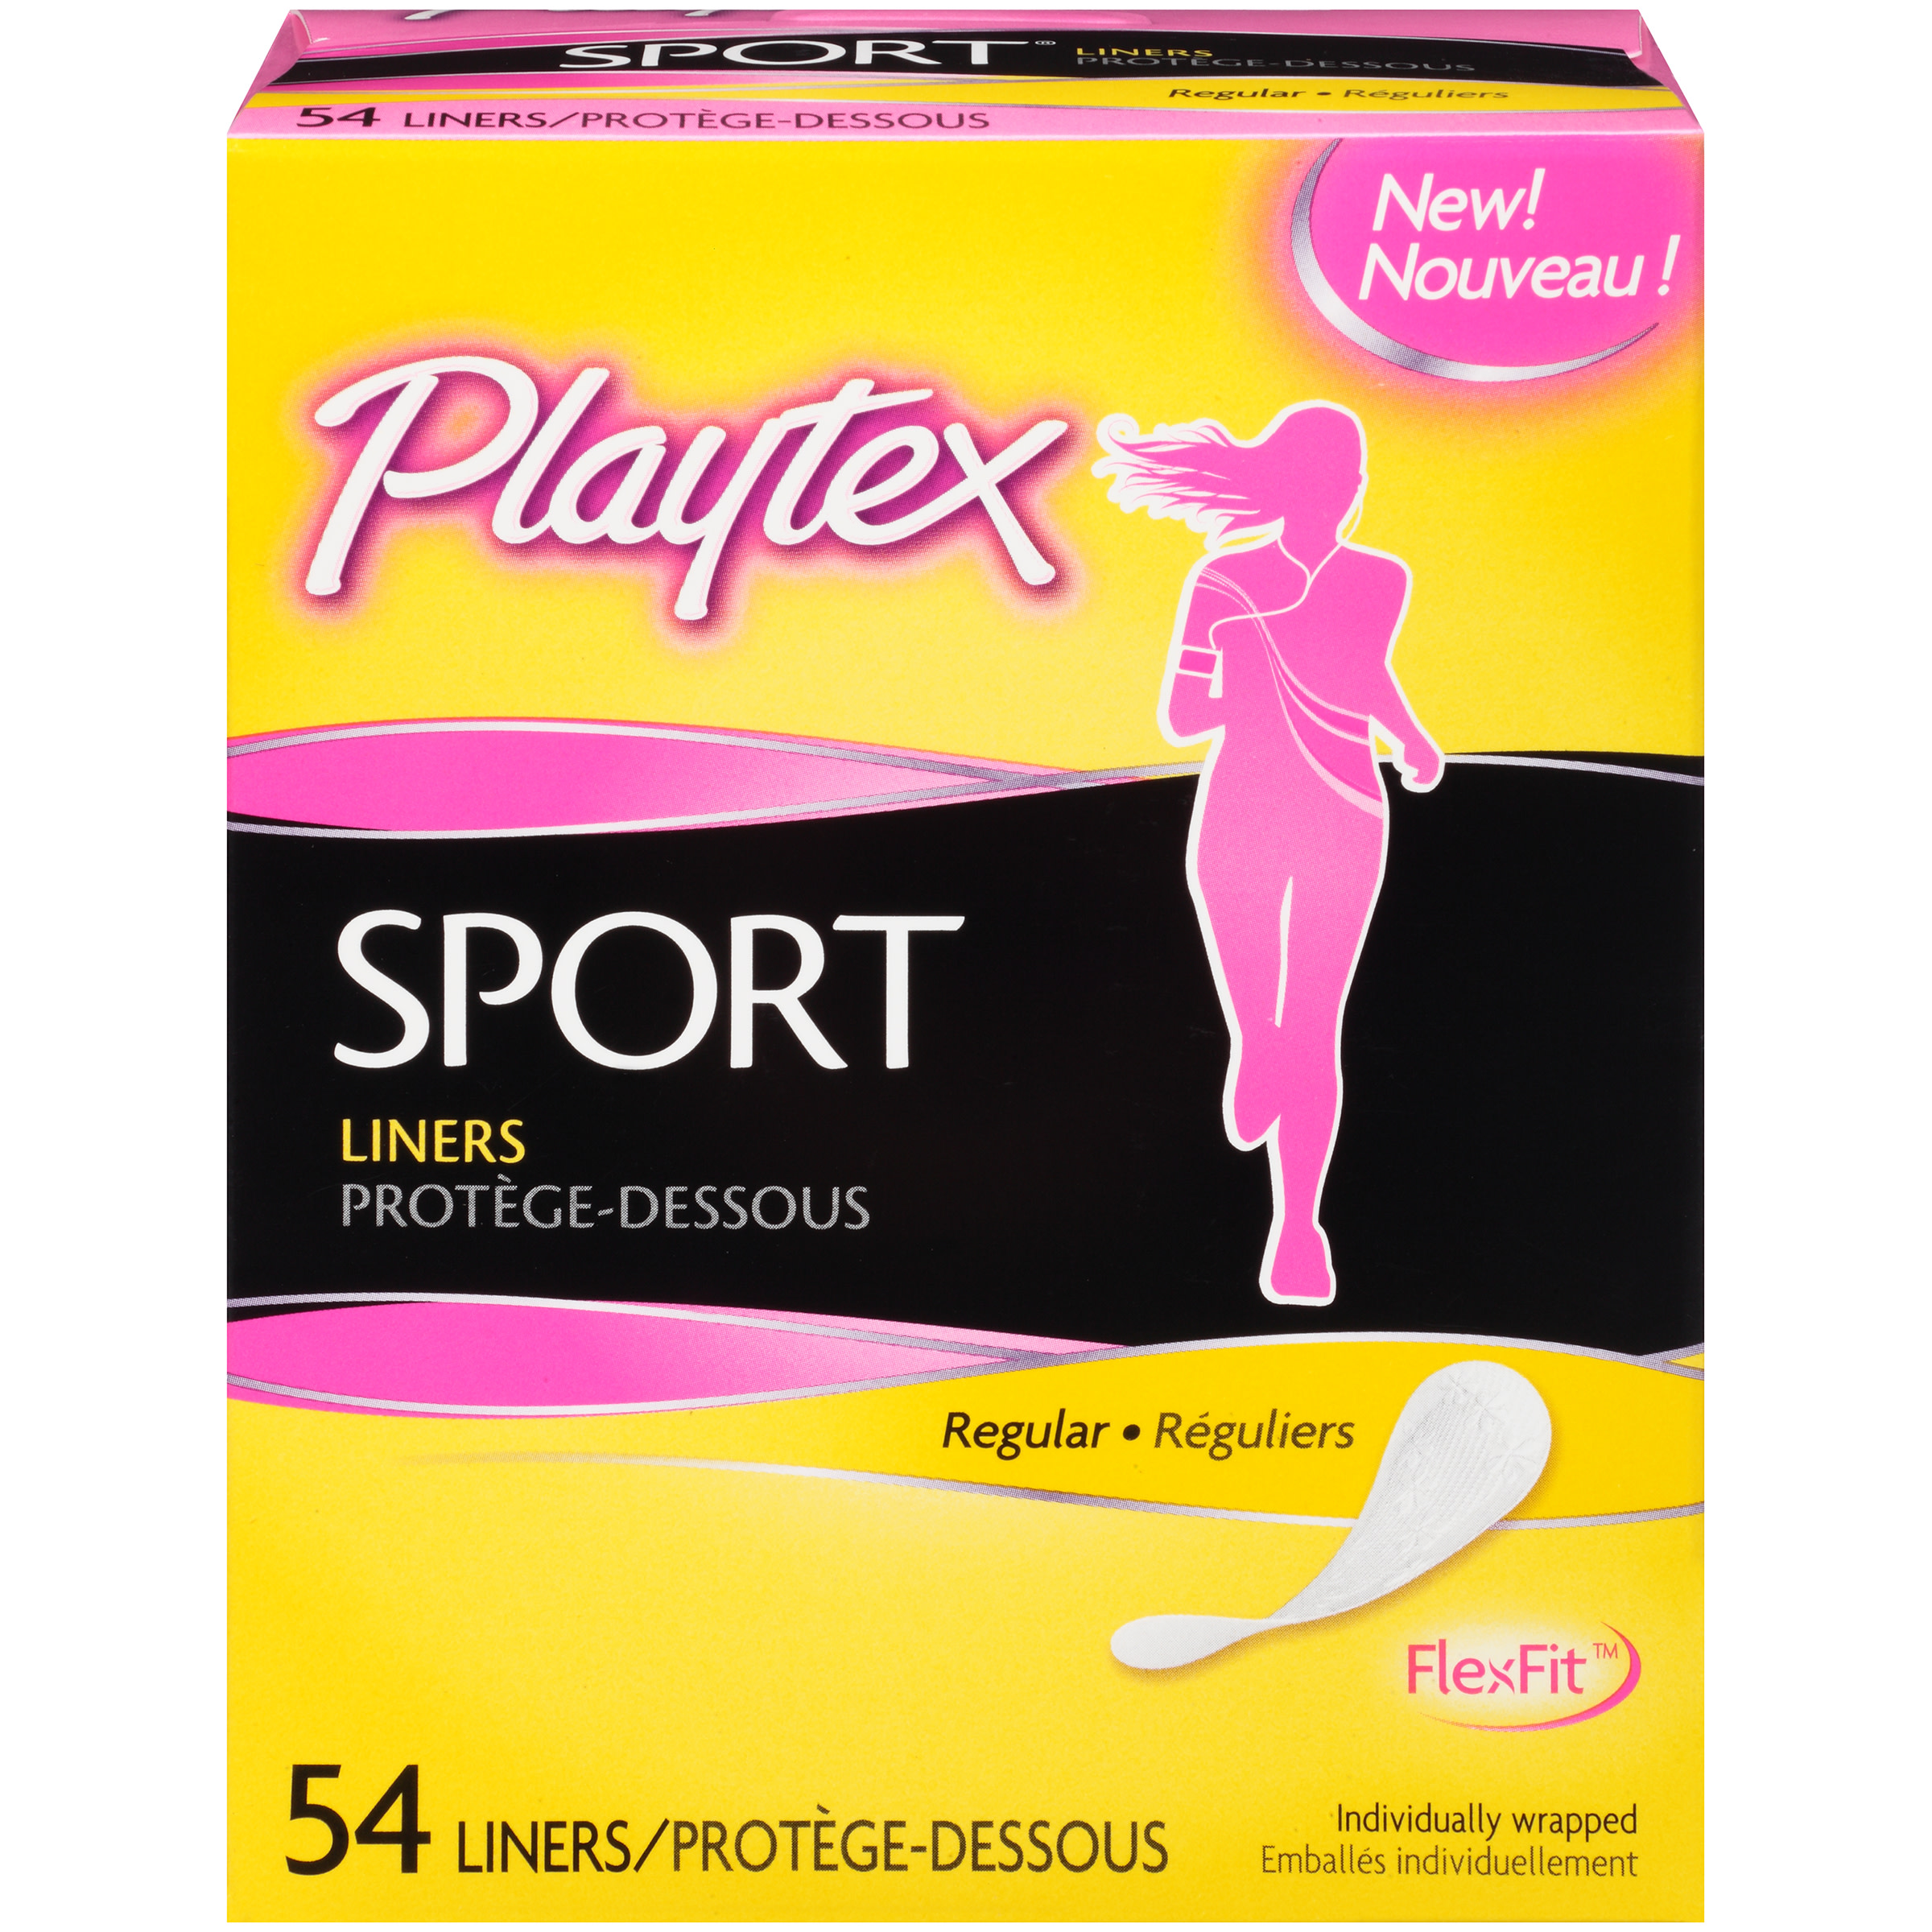 Playtex Sport Body Shaped Liners Regular Absorbency - 54 Count - image 1 of 4